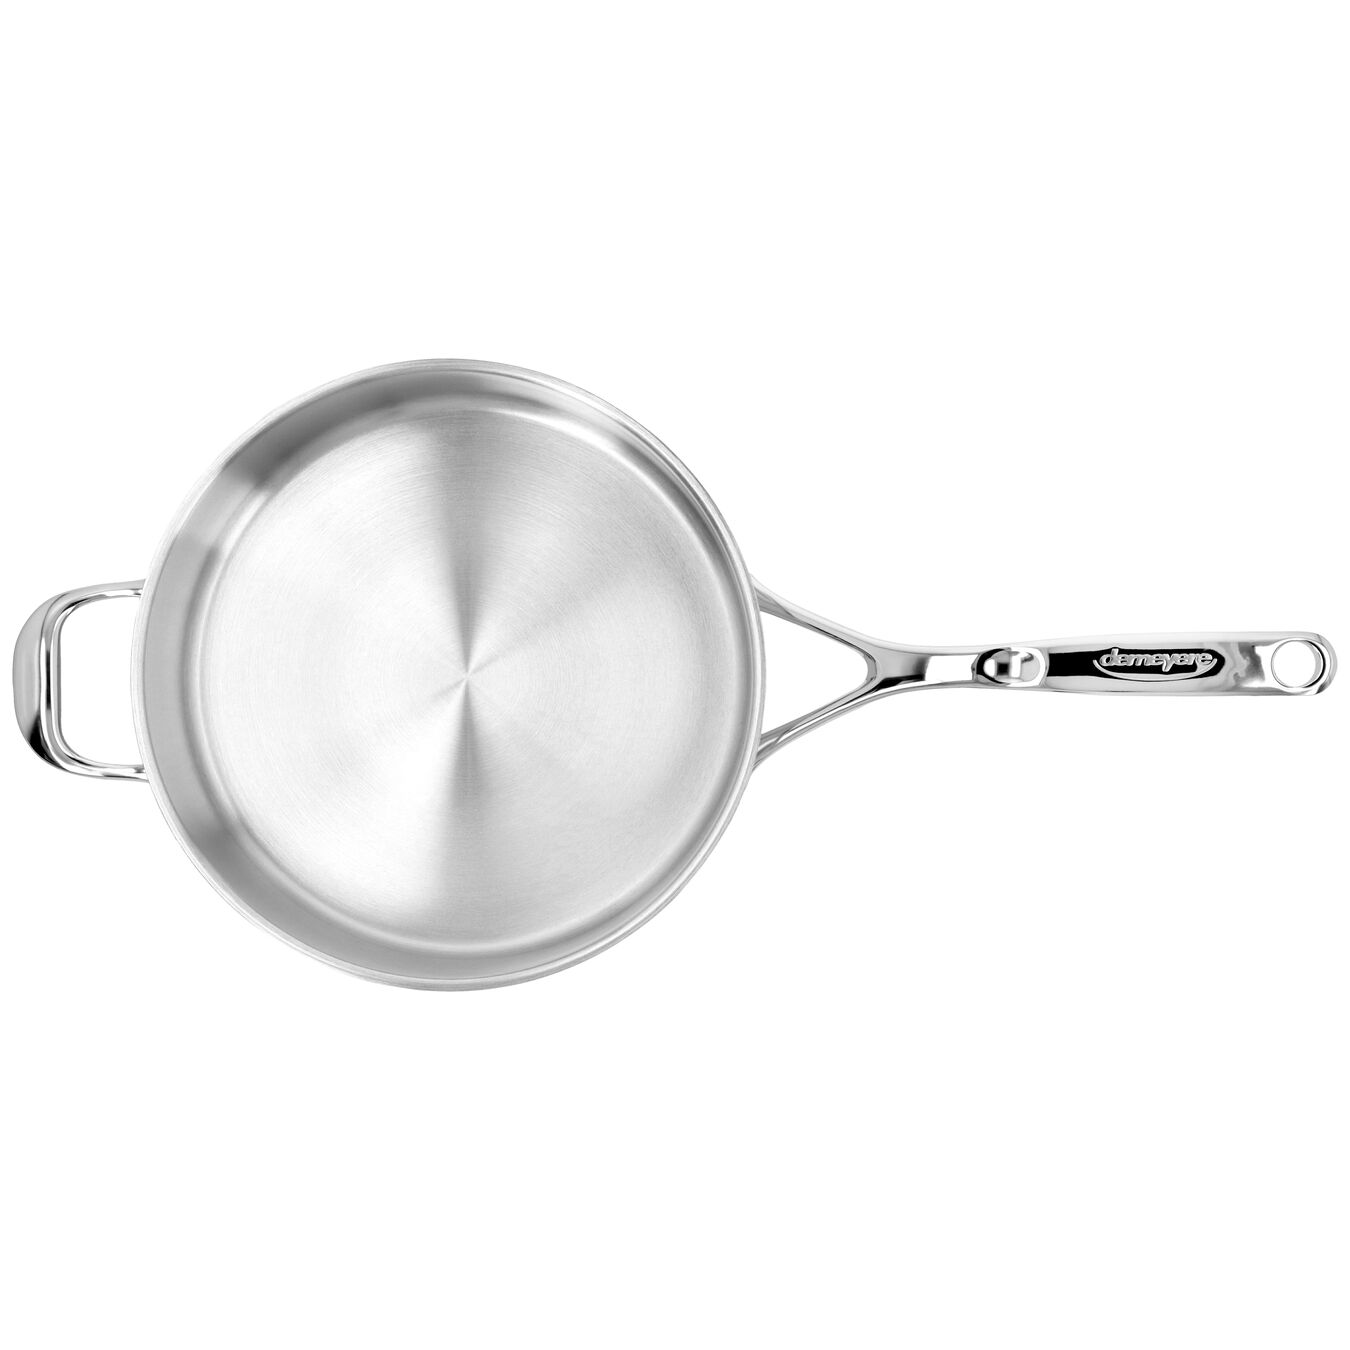 9.5-inch Sauté Pan with Helper Handle and Lid, 18/10 Stainless Steel ,,large 6